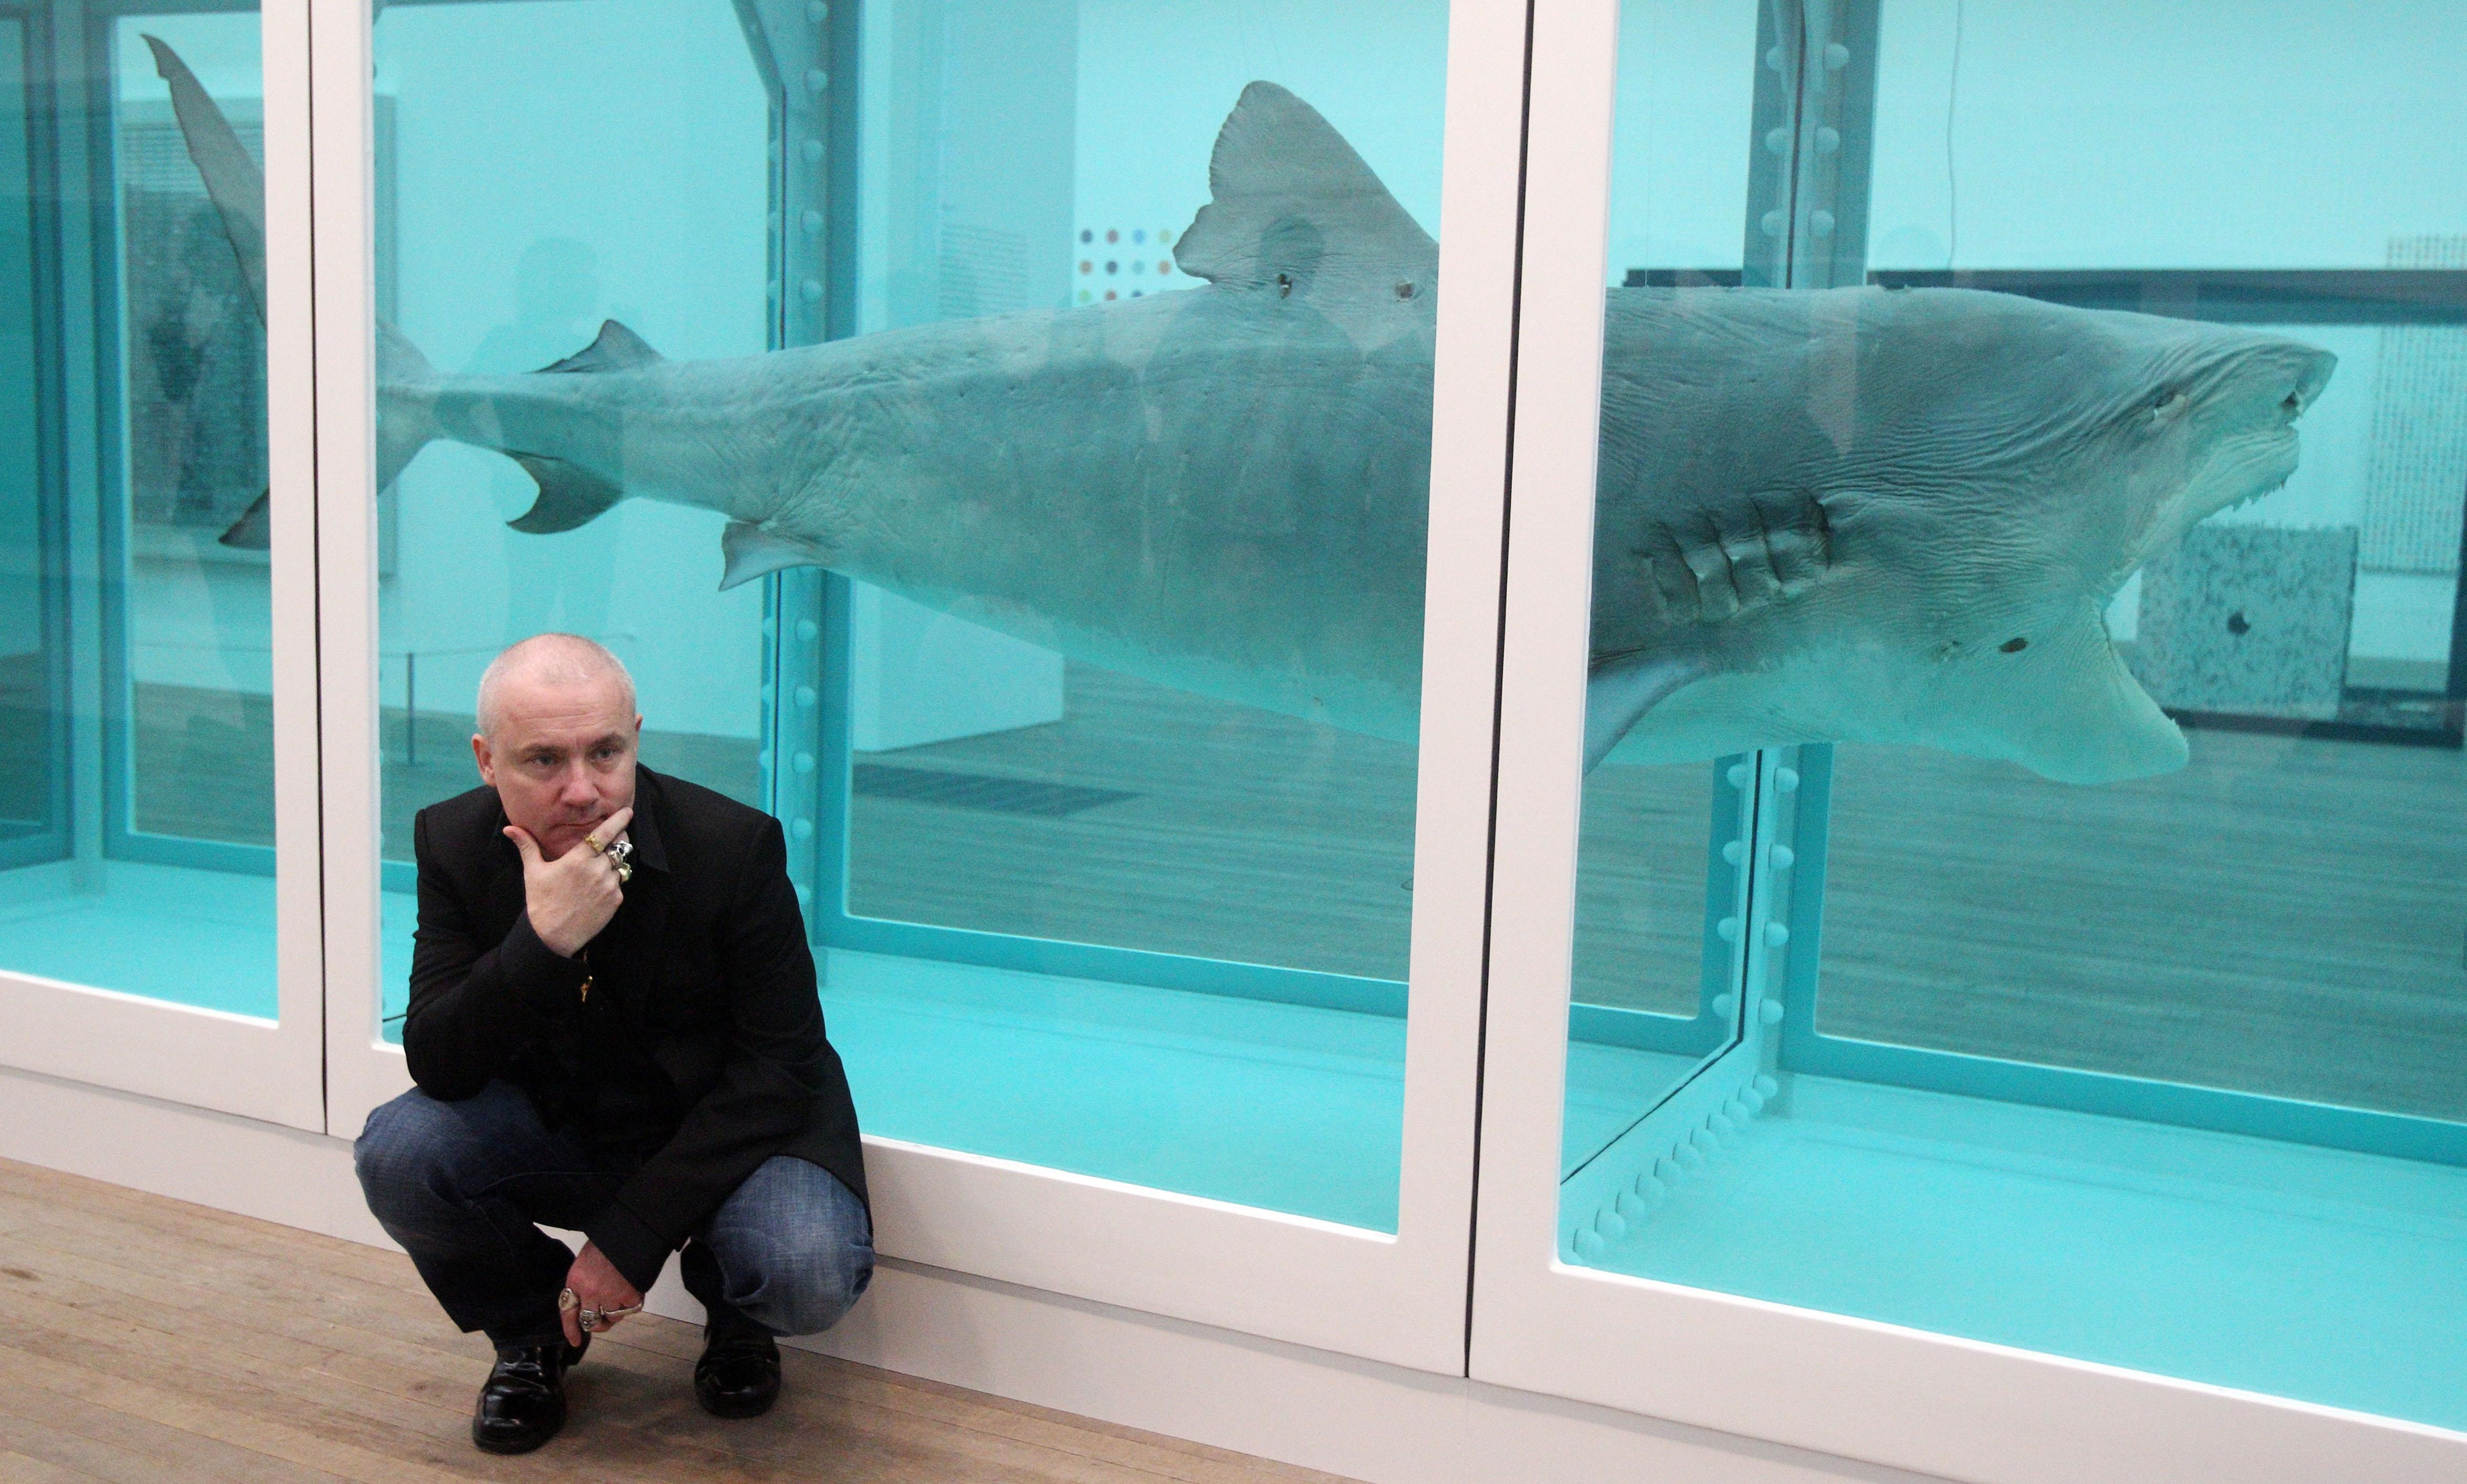 Damian Hirst and 'The Physical Impossibility of Death in the Mind of Someone Living' 